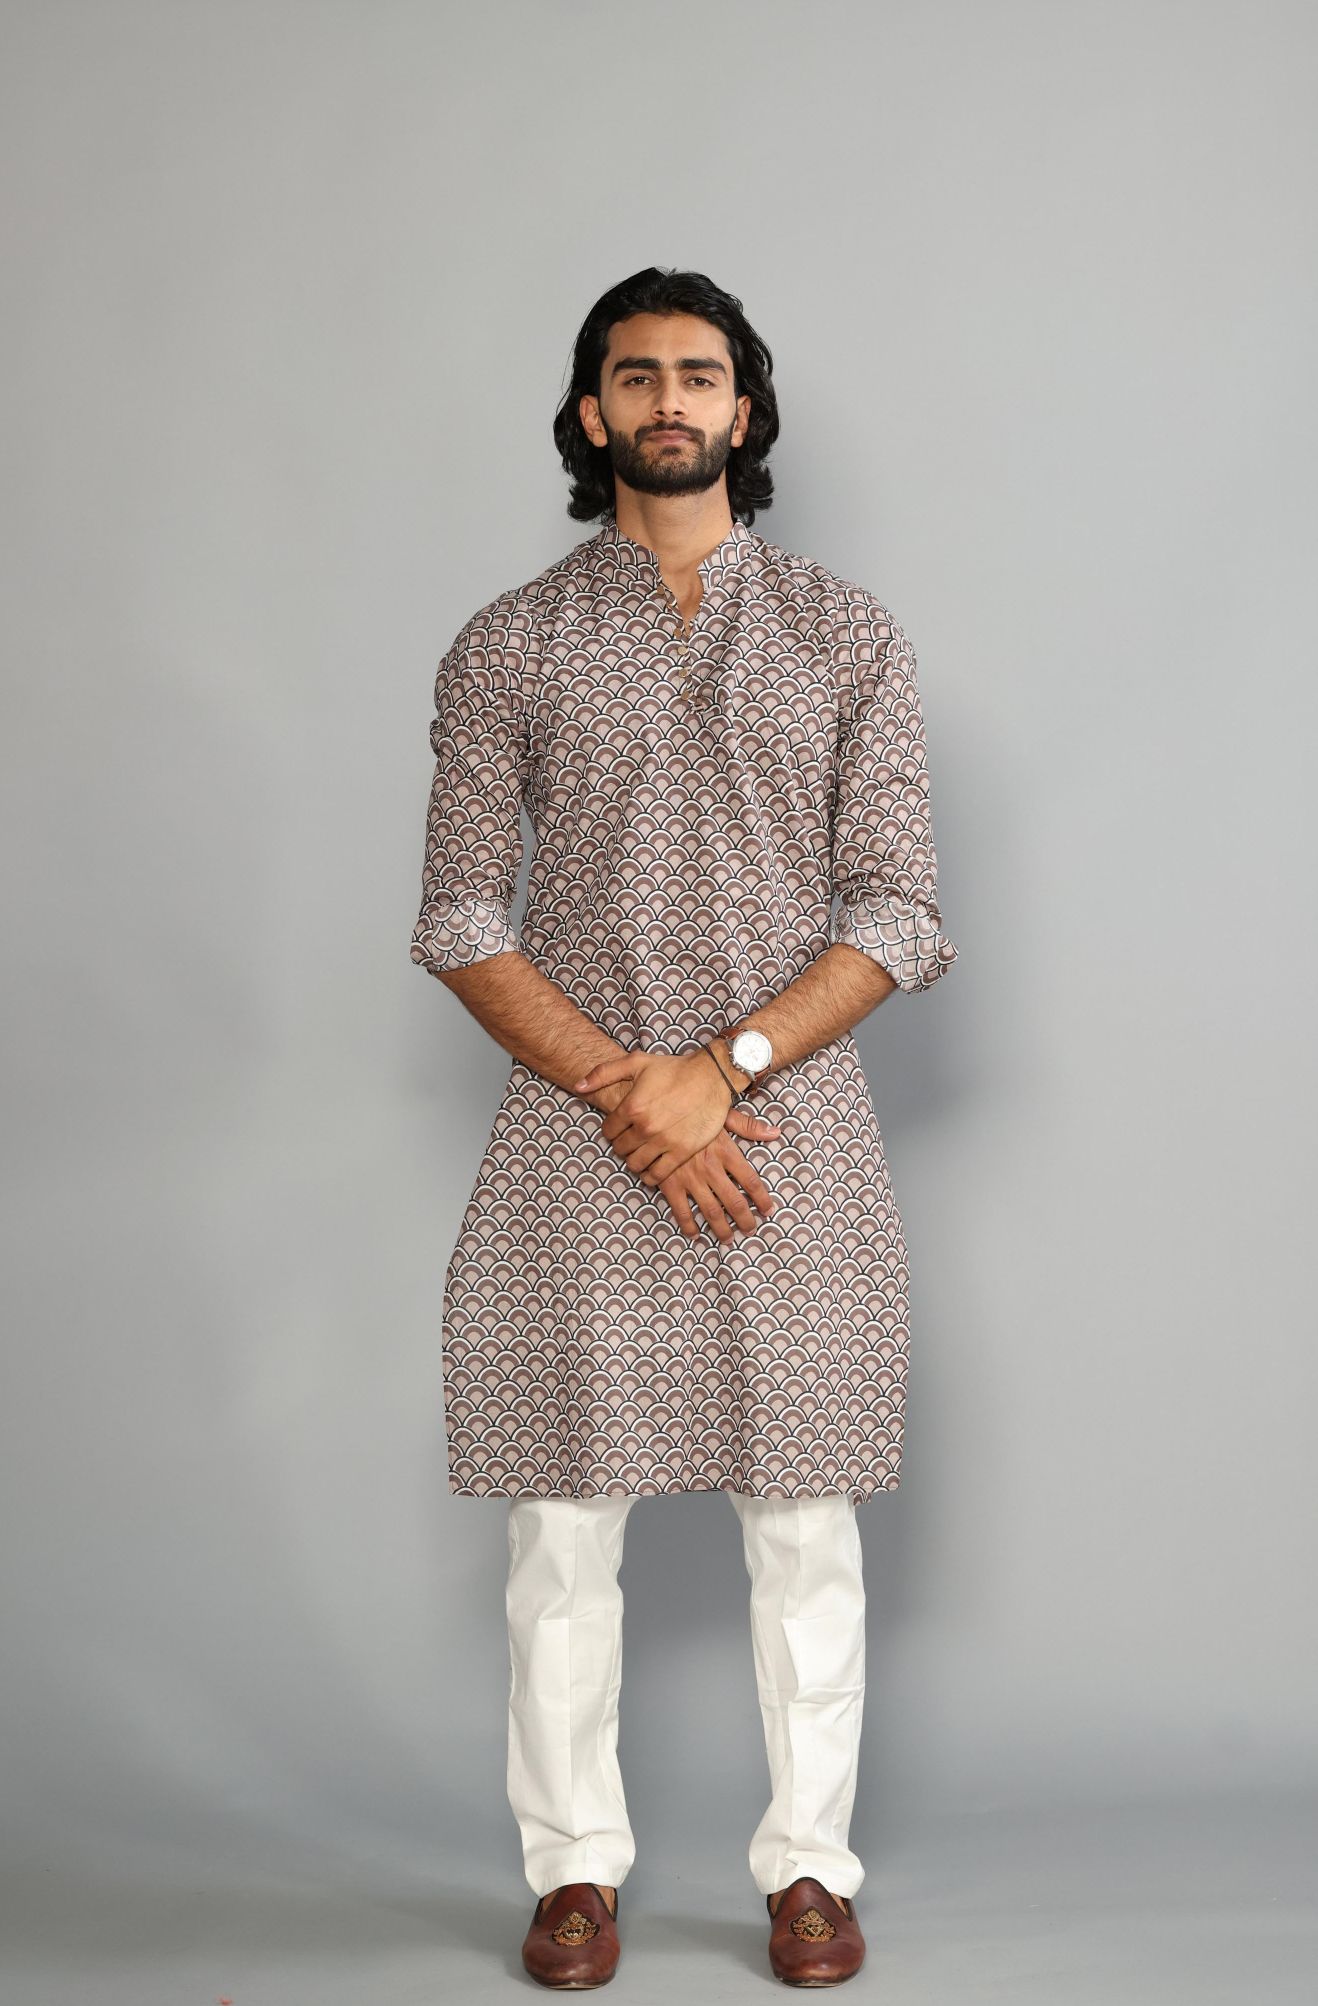 Hand-crafted Tawny Brown Scales Print Sanganeri Kurta With White Pajama | Diwali Eid, Pooja | Traditional, Functional, Wedding, Indian Party Wear